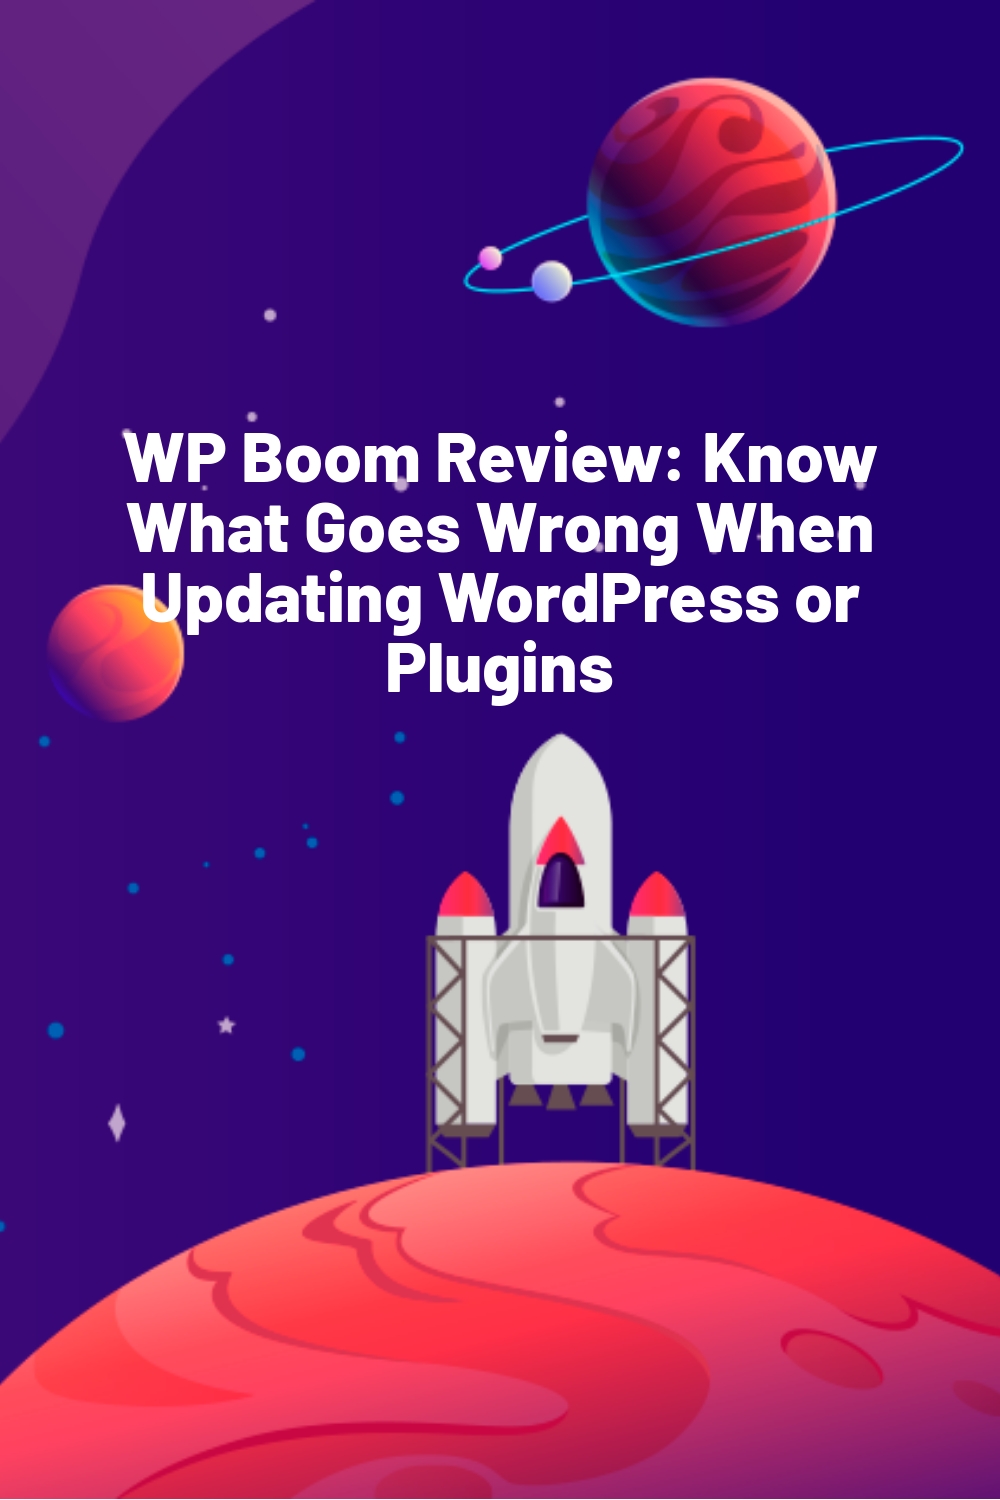 WP Boom Review: Know What Goes Wrong When Updating WordPress or Plugins